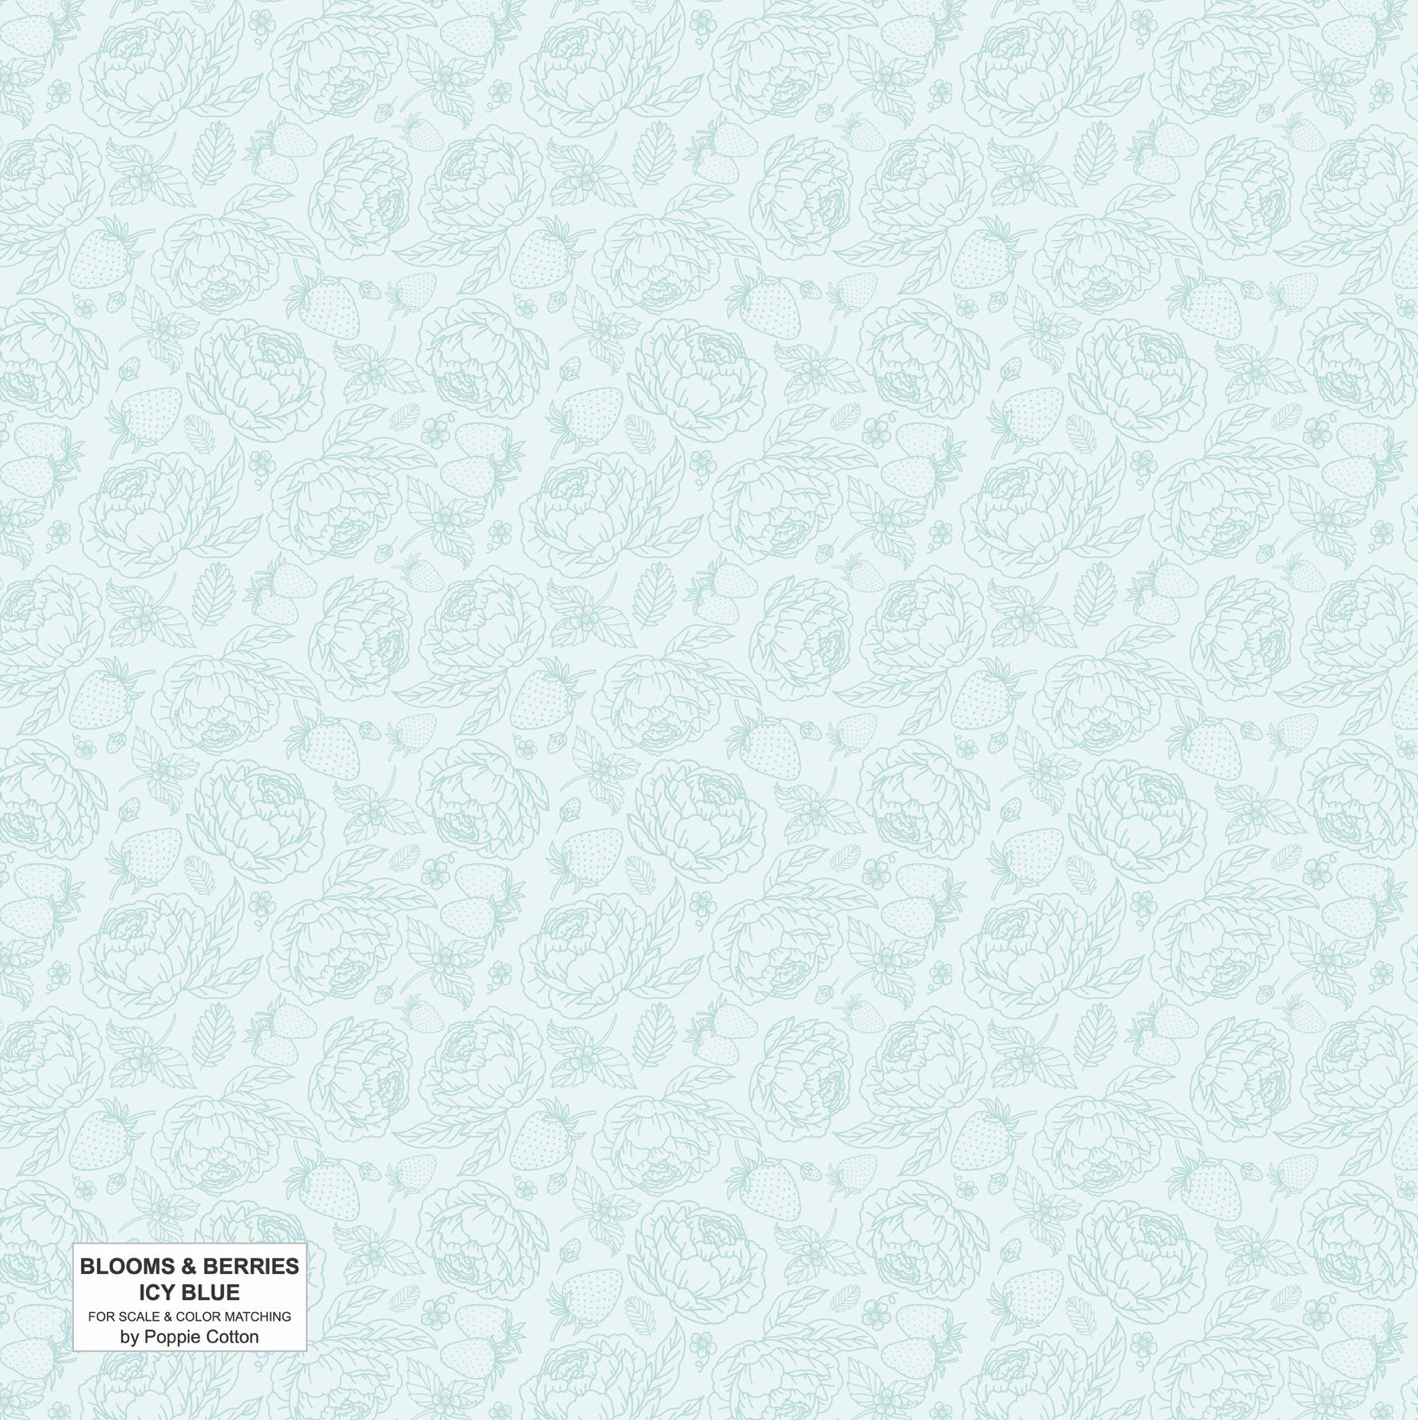 Blooms and Berries, Icey Blue Light Teal, BAB2484, sold by the 1/2 yard